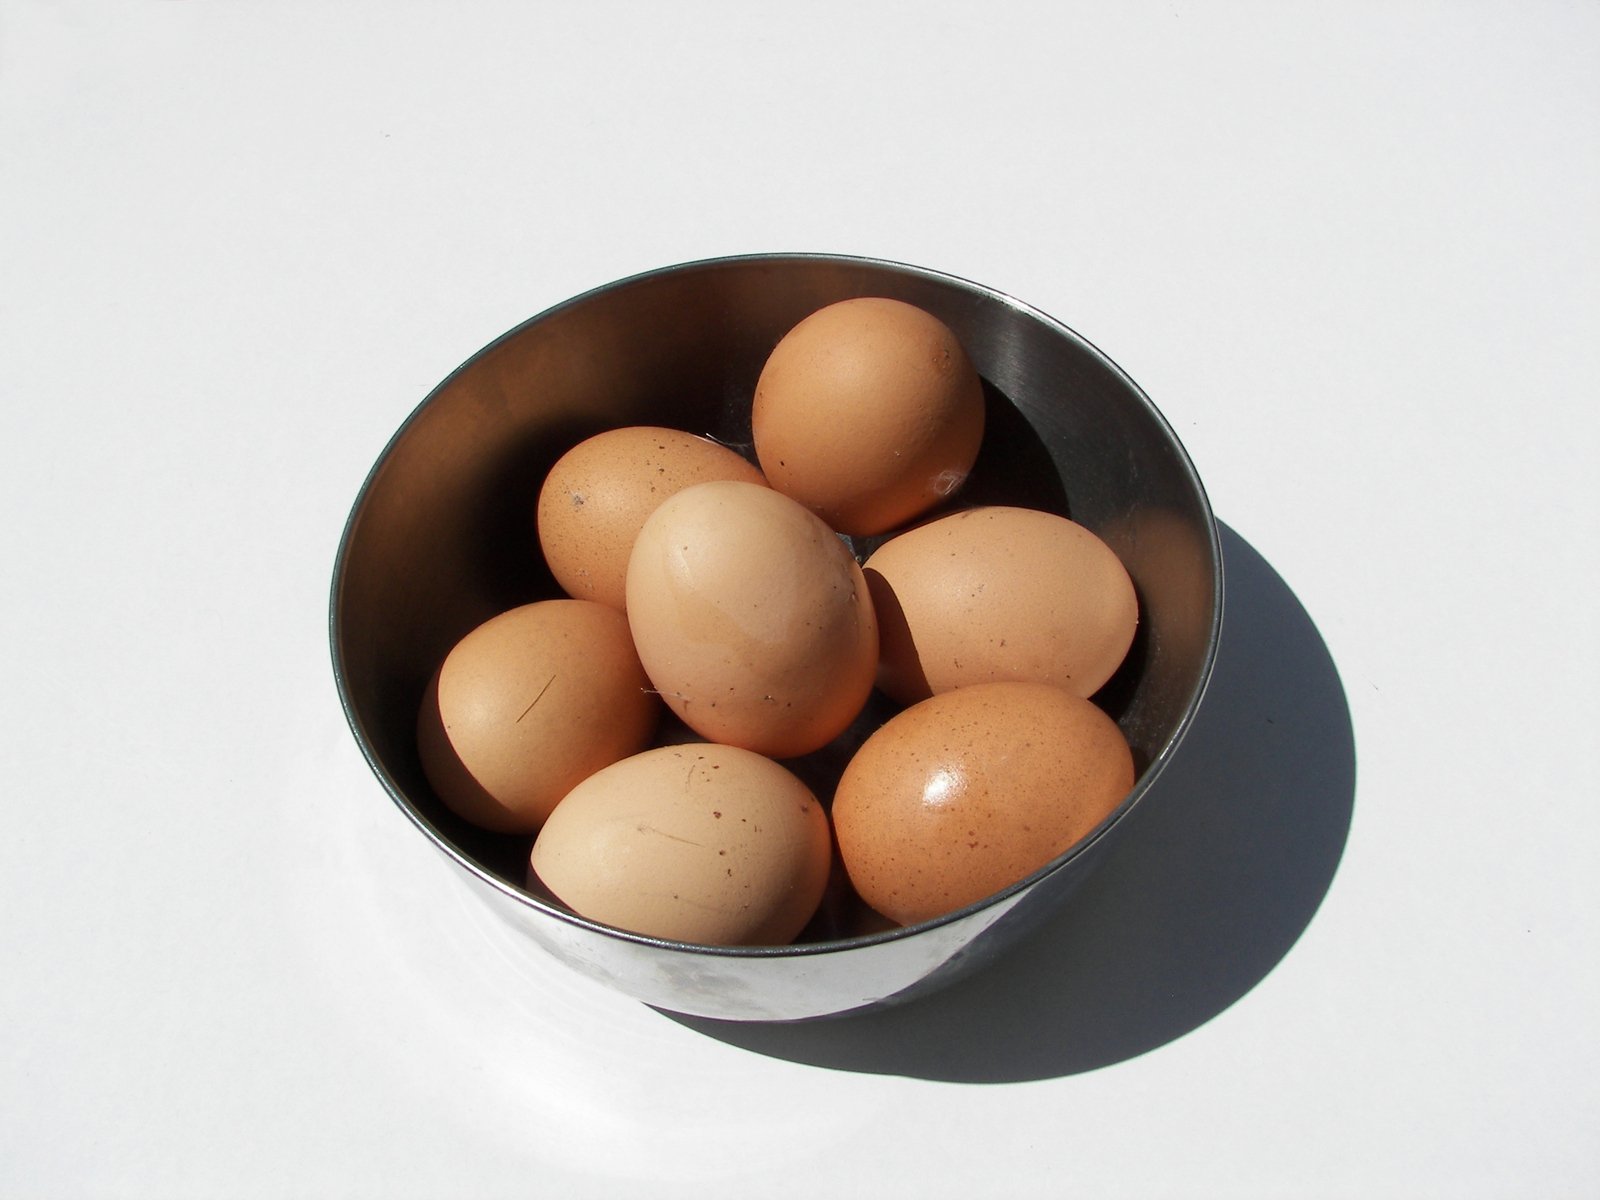 a bunch of eggs are in a metal cup